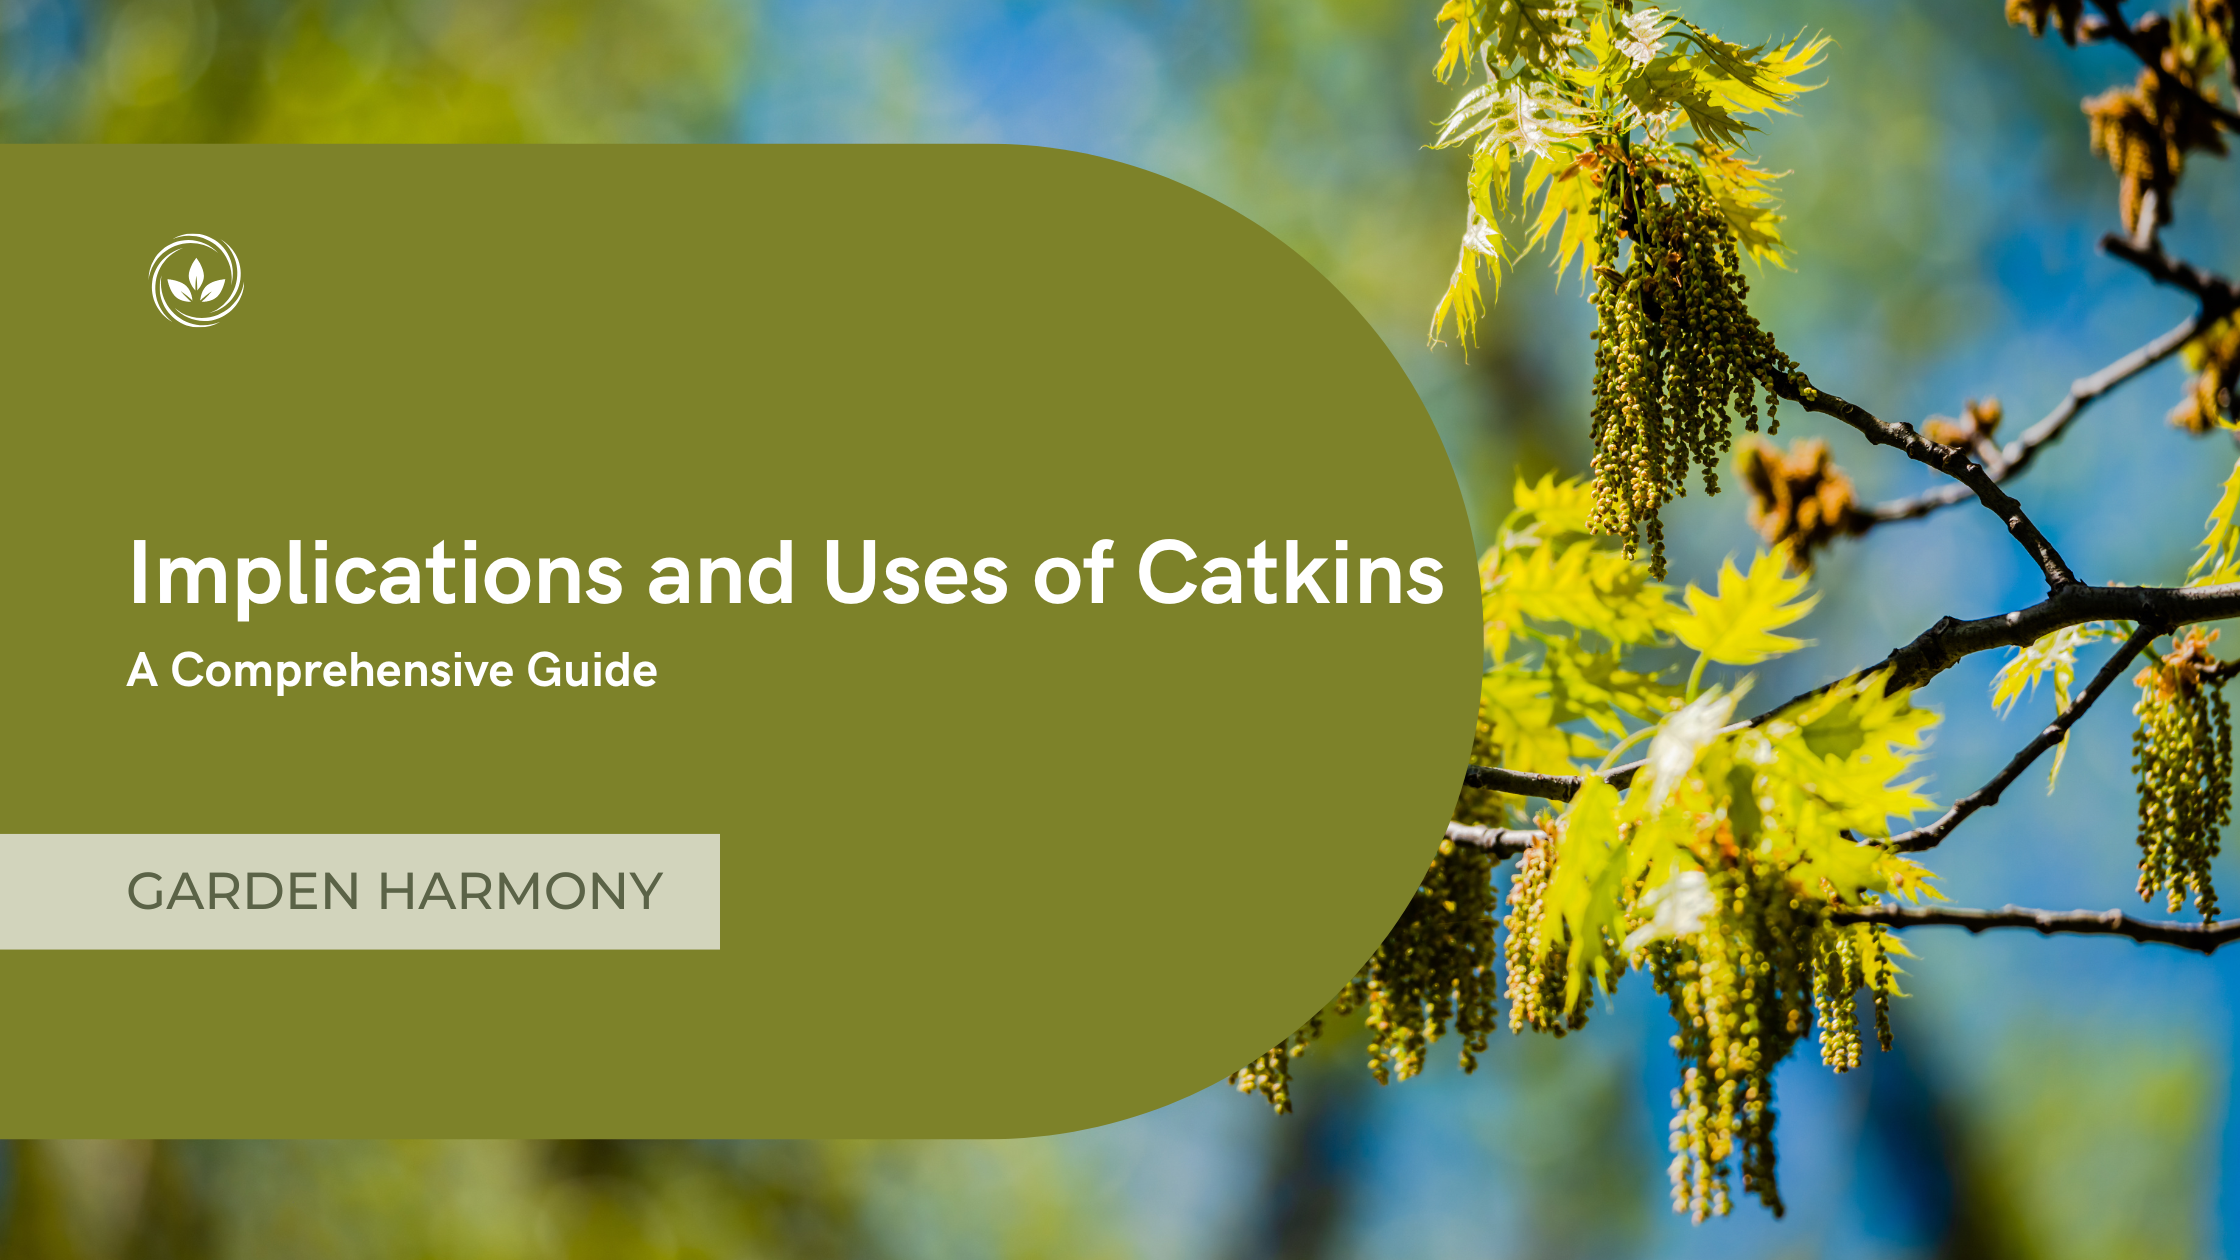 Implications and Uses of Catkins